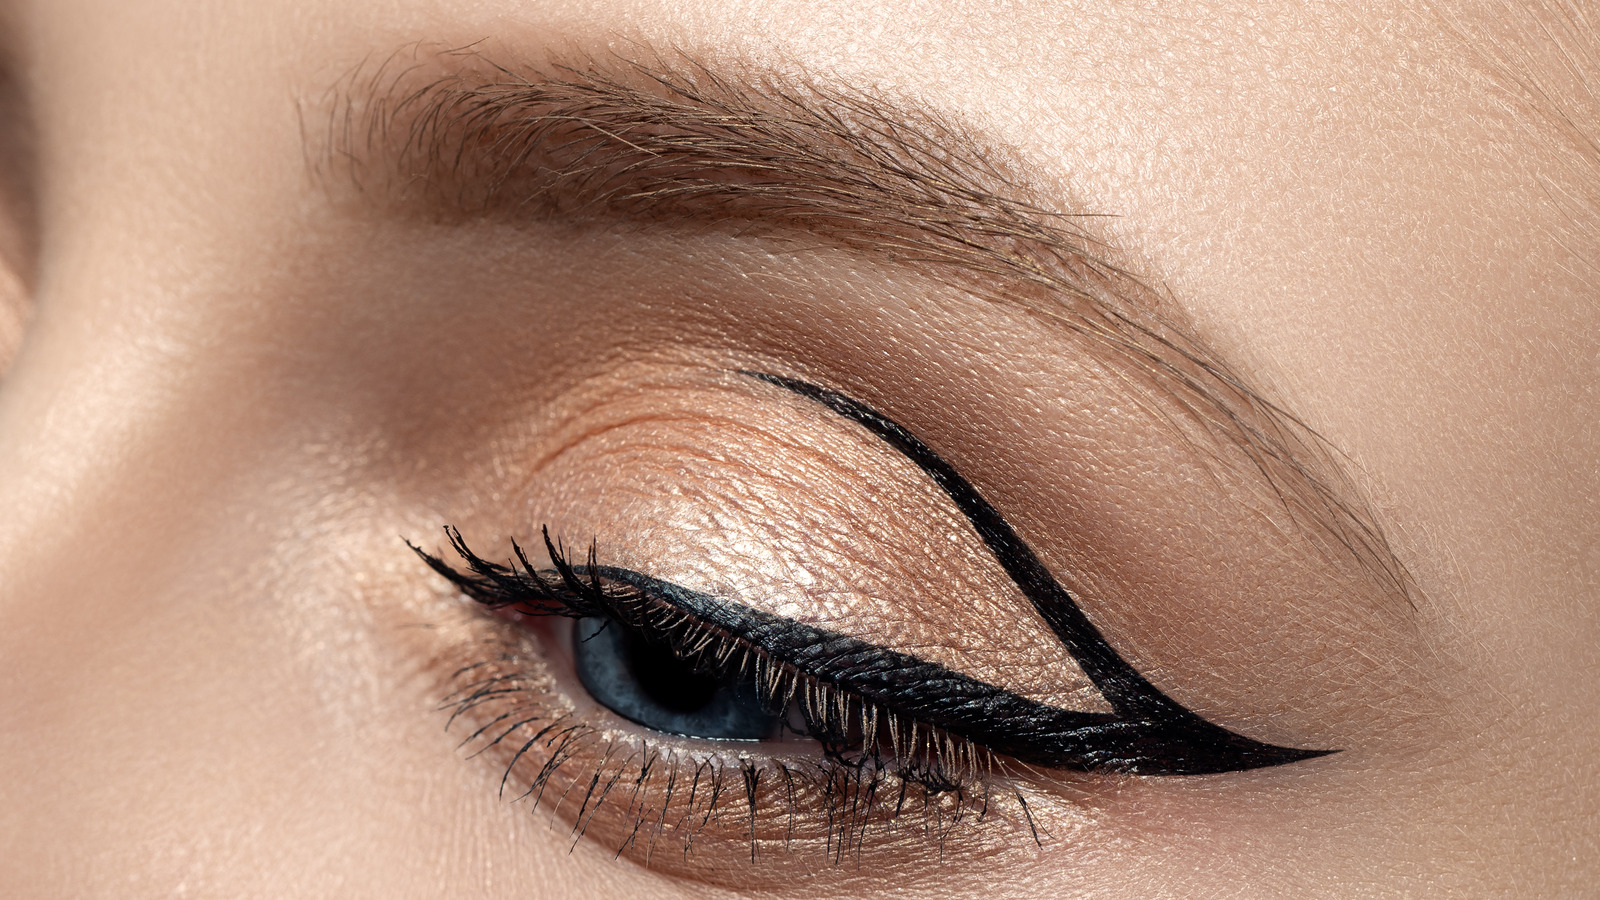 Graphic Eyeliner Is Trending - Here Are 5 Styles You Can Draw